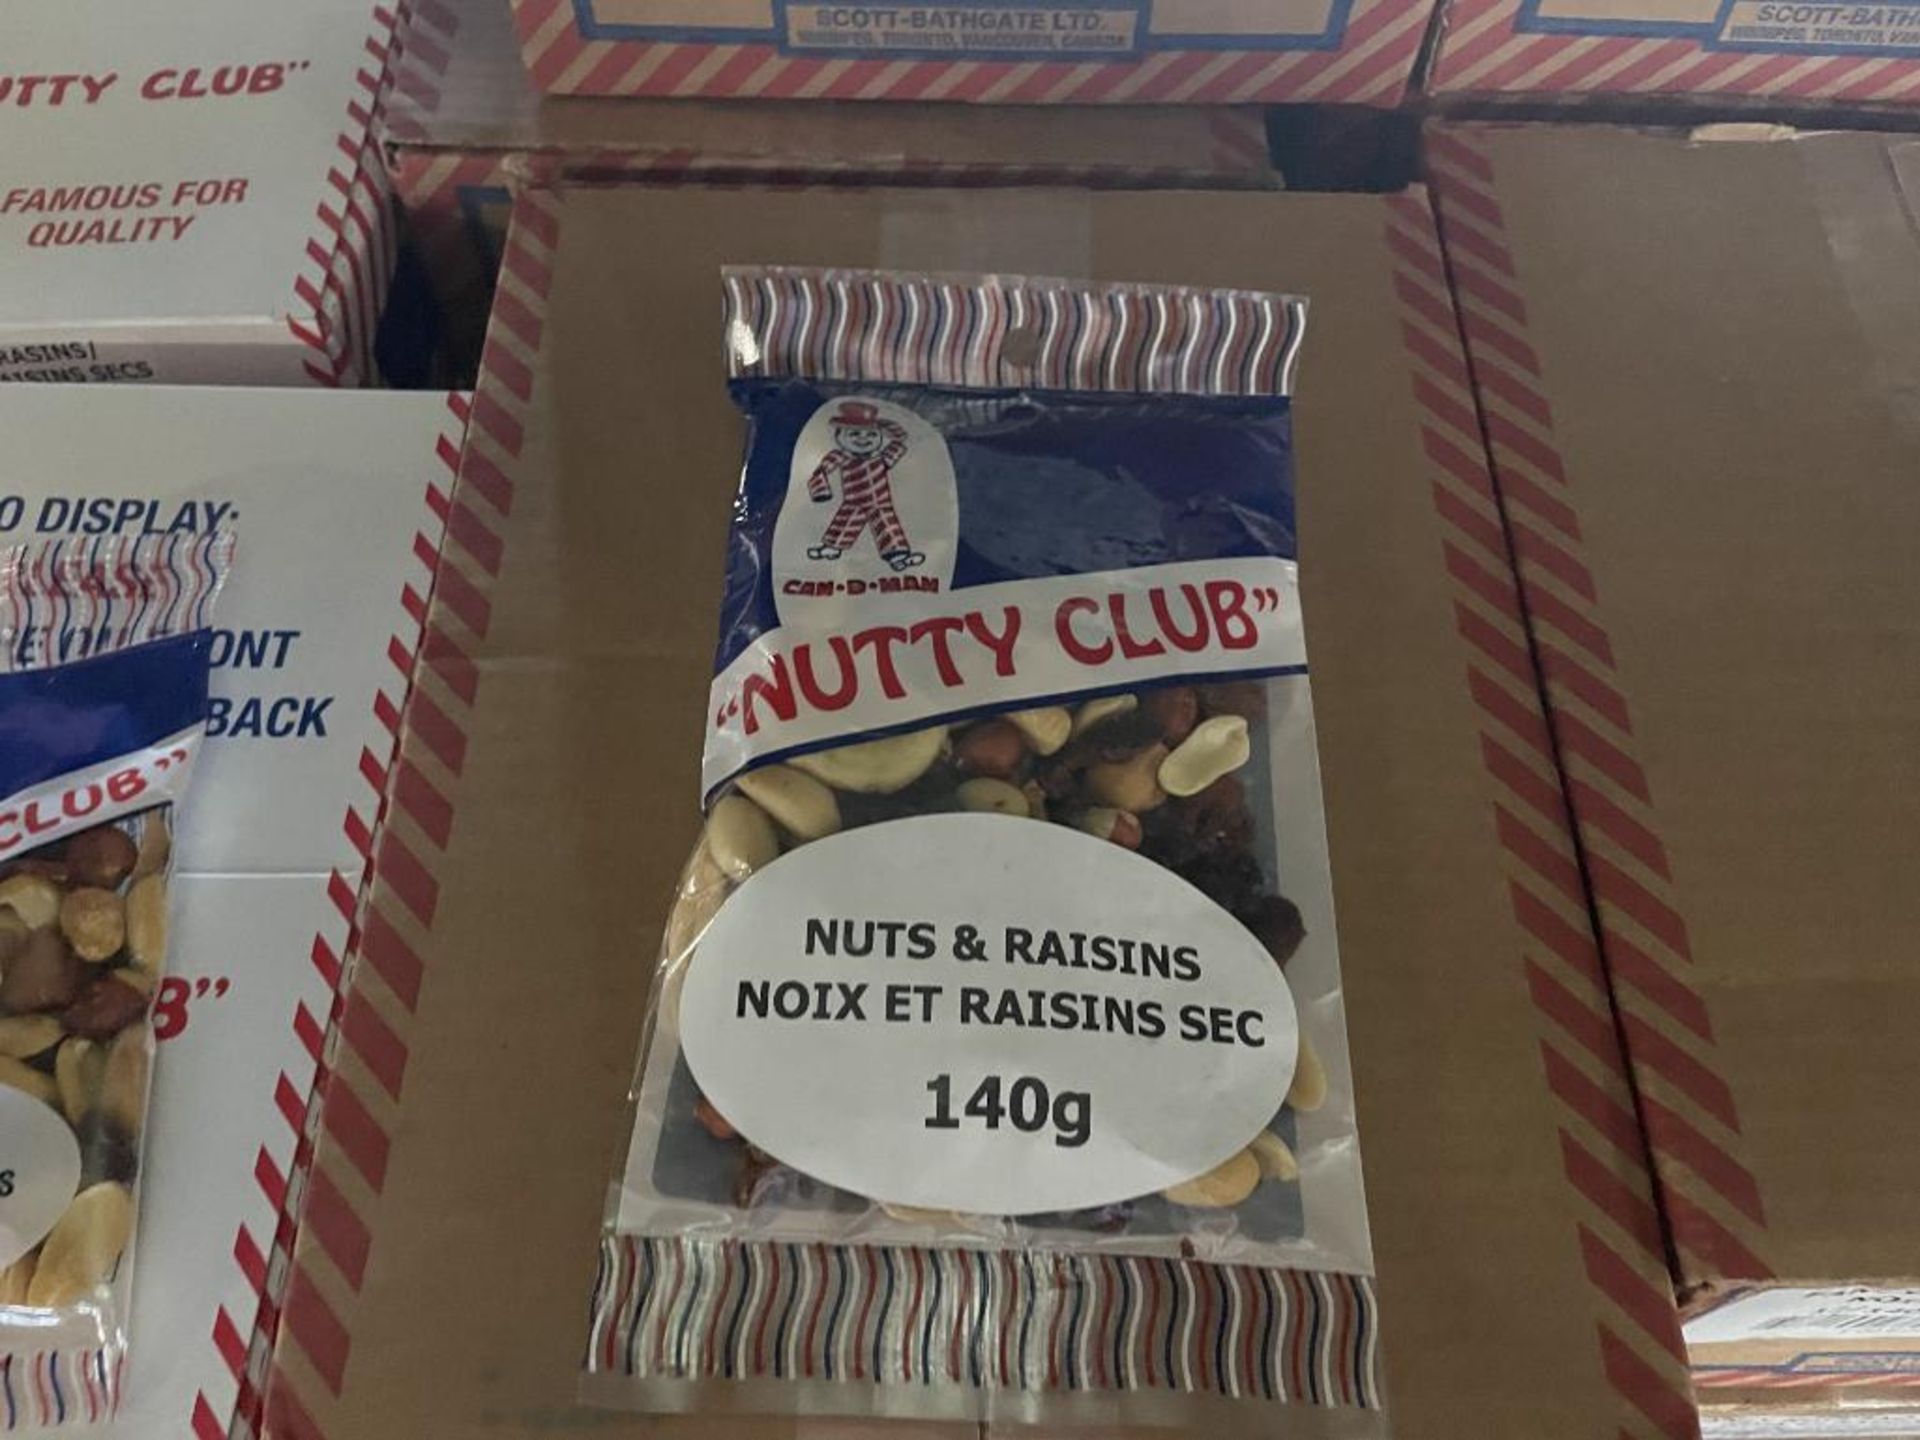 (17) BOXES OF NUTTY CLUB NUTS AND RAISINS, (11) 12/140G PER BOX & (6) 12/50G PER BOX - Image 2 of 5